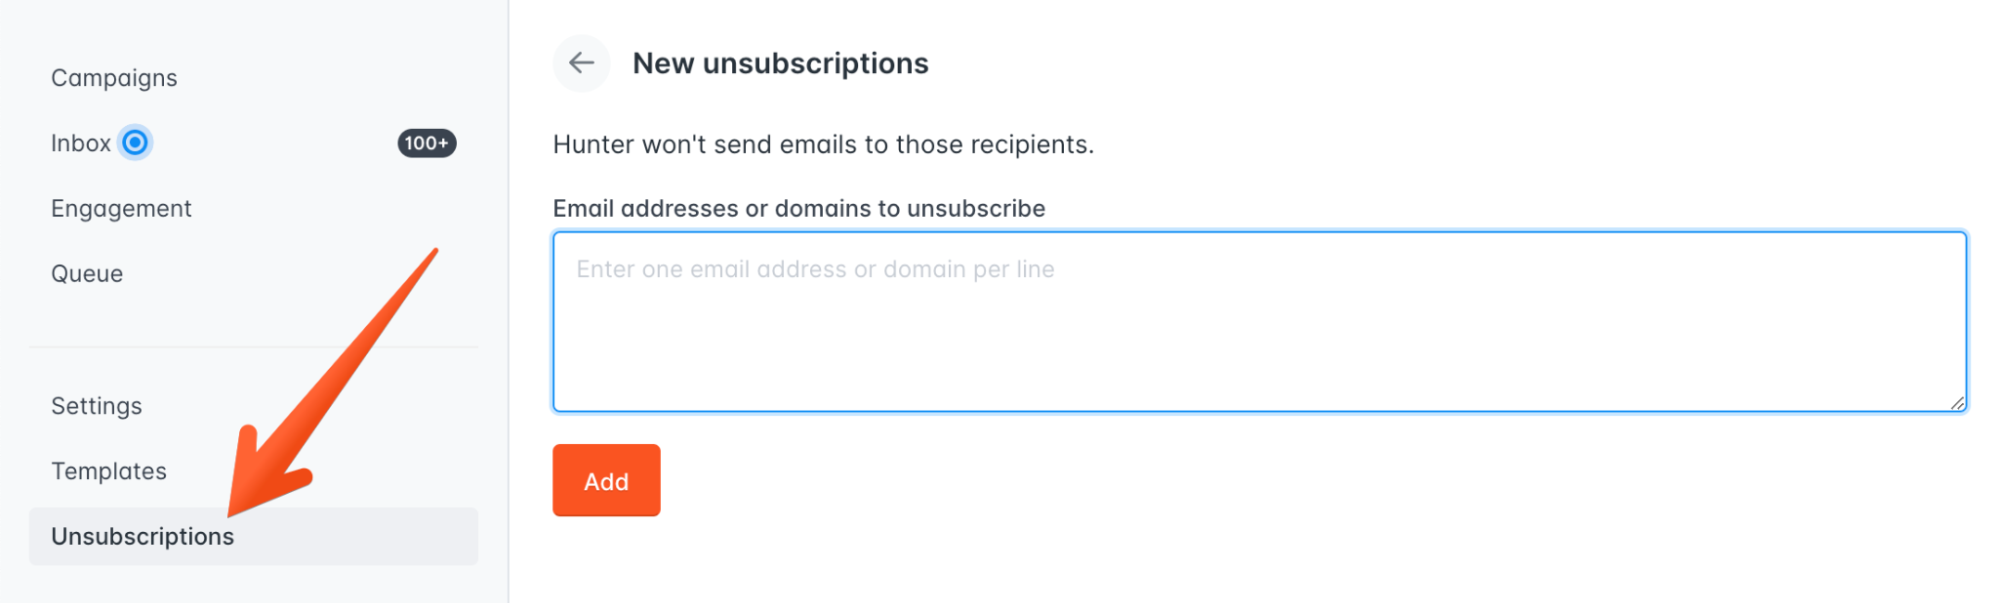 In Hunter Campaigns, you can use the Unsubscriptions tool to manually unsubscribe recipients who ask to be unsubscribed